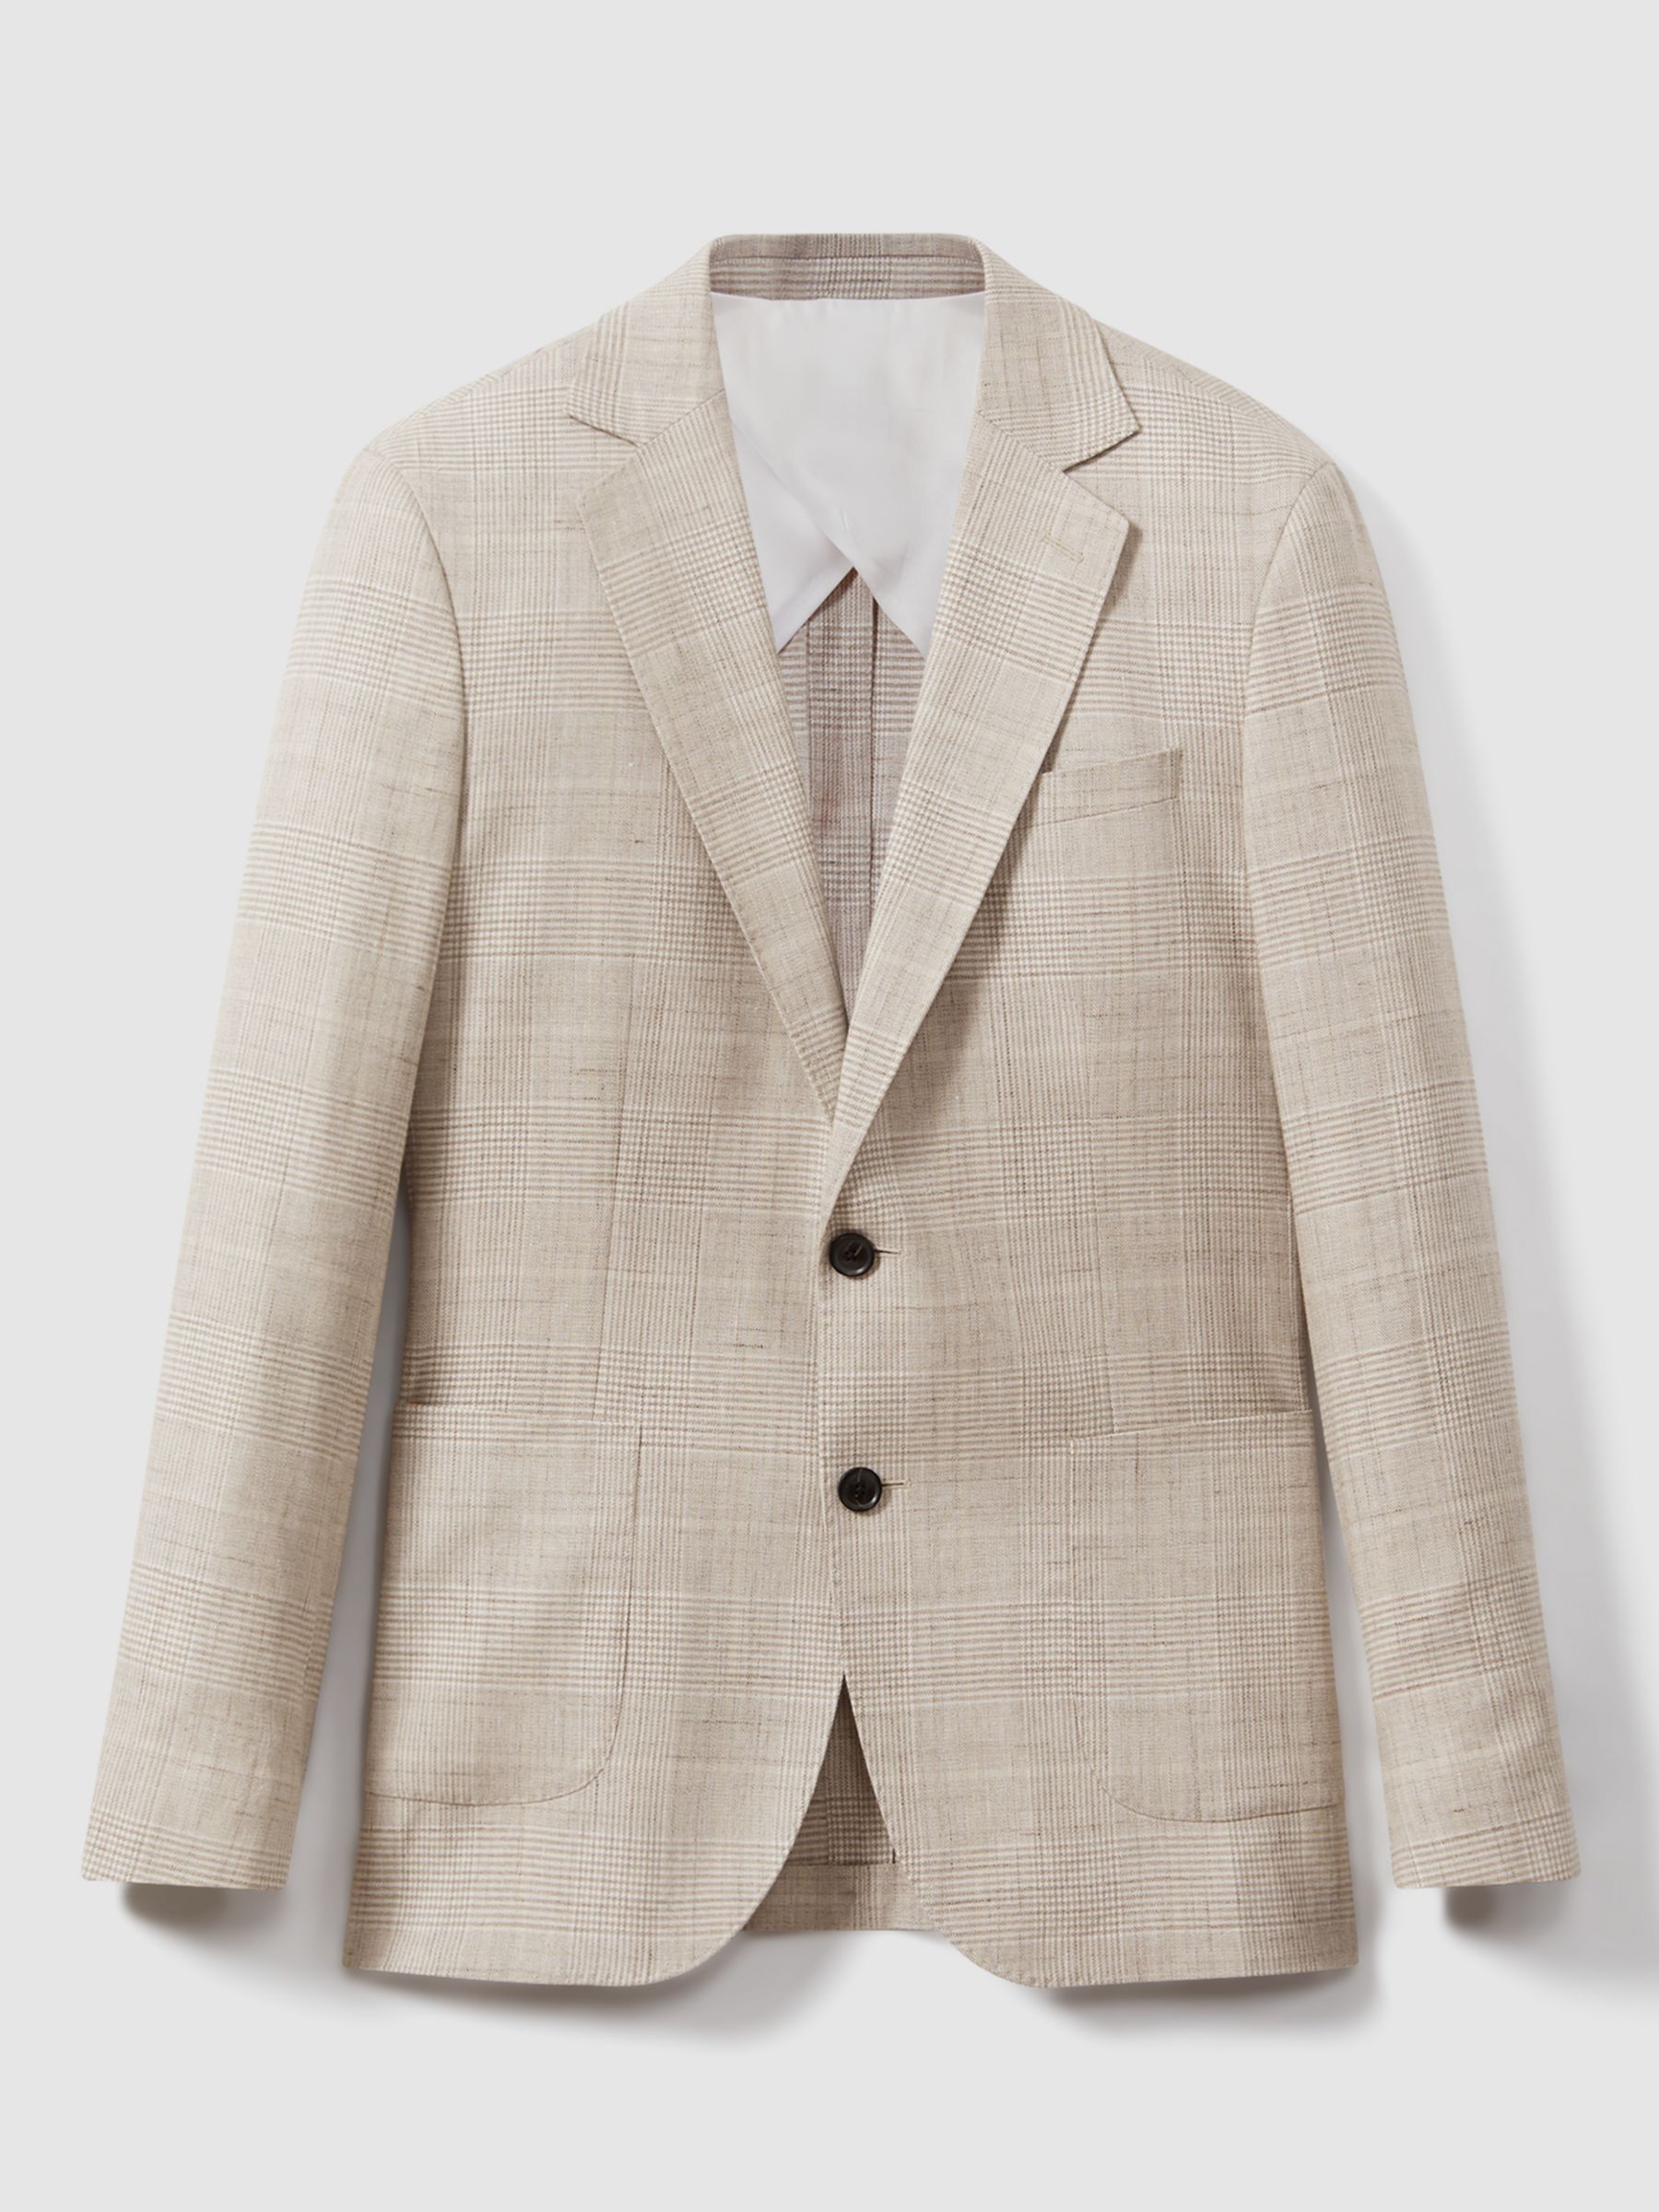 Reiss Boxhill Linen Blend Tailored Fit Suit Jacket, Oatmeal, 36